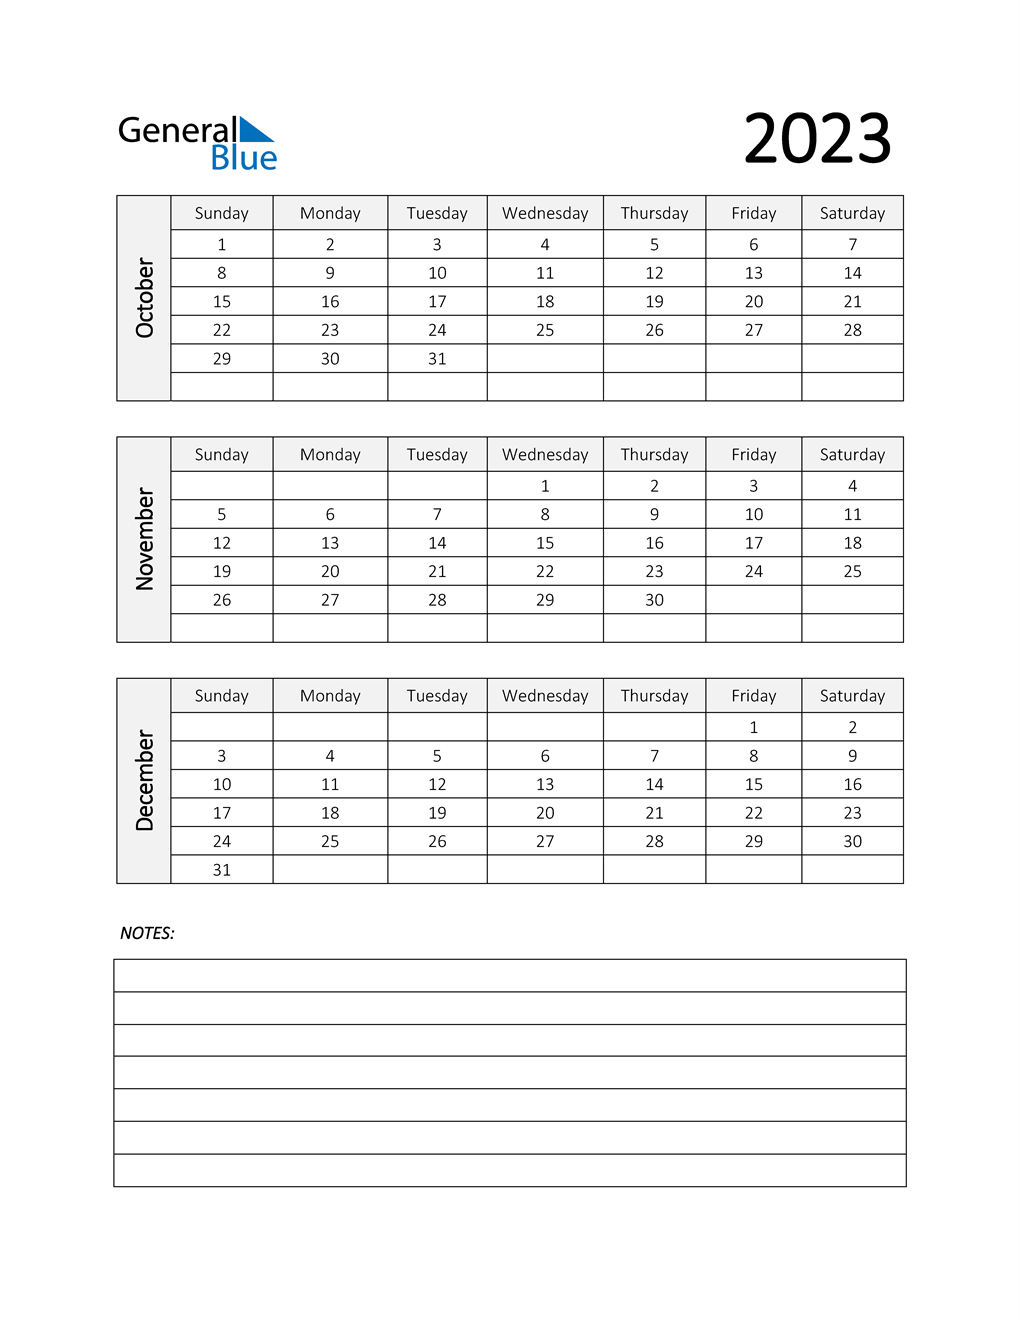  Q4 2023 Calendar with Notes